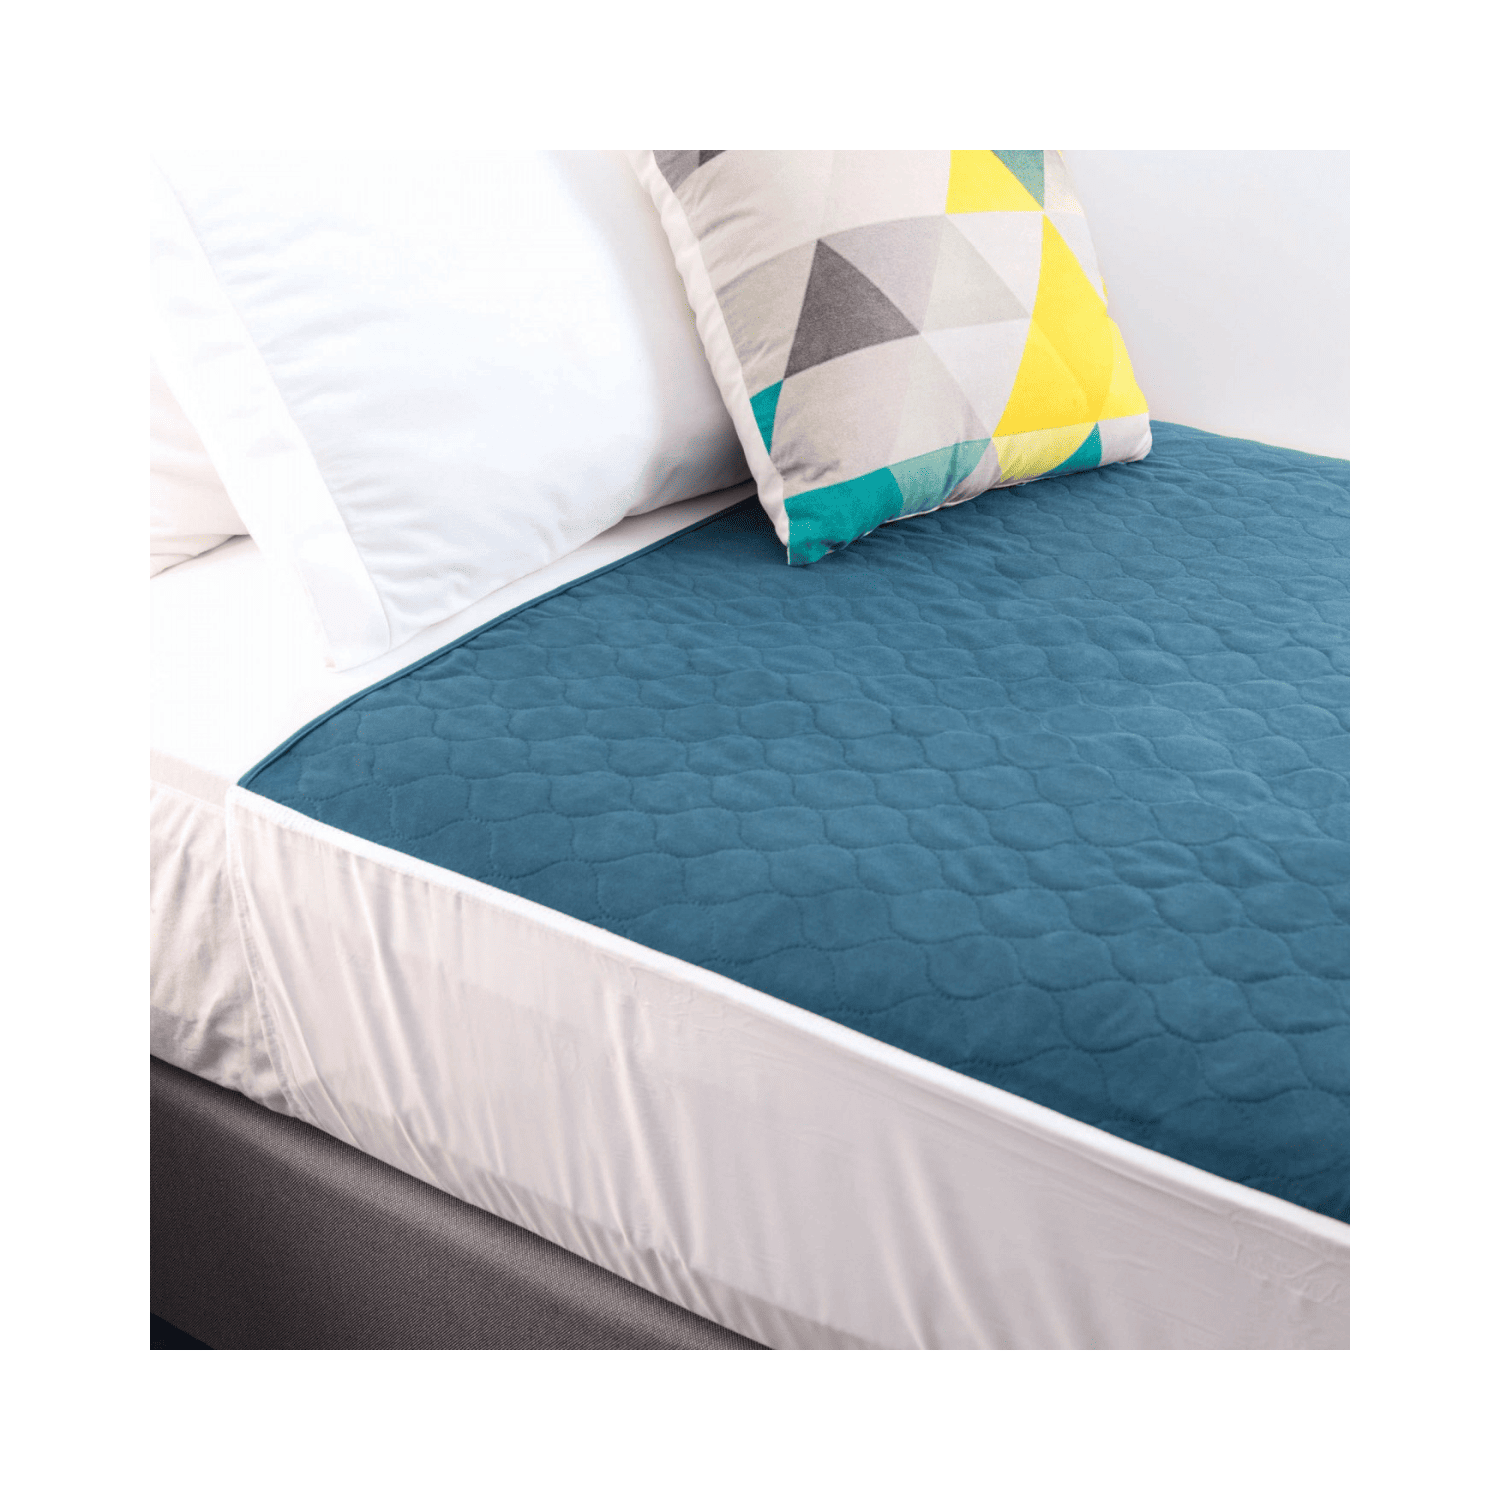 Conni Bed Pad with Tuck-ins_Teal